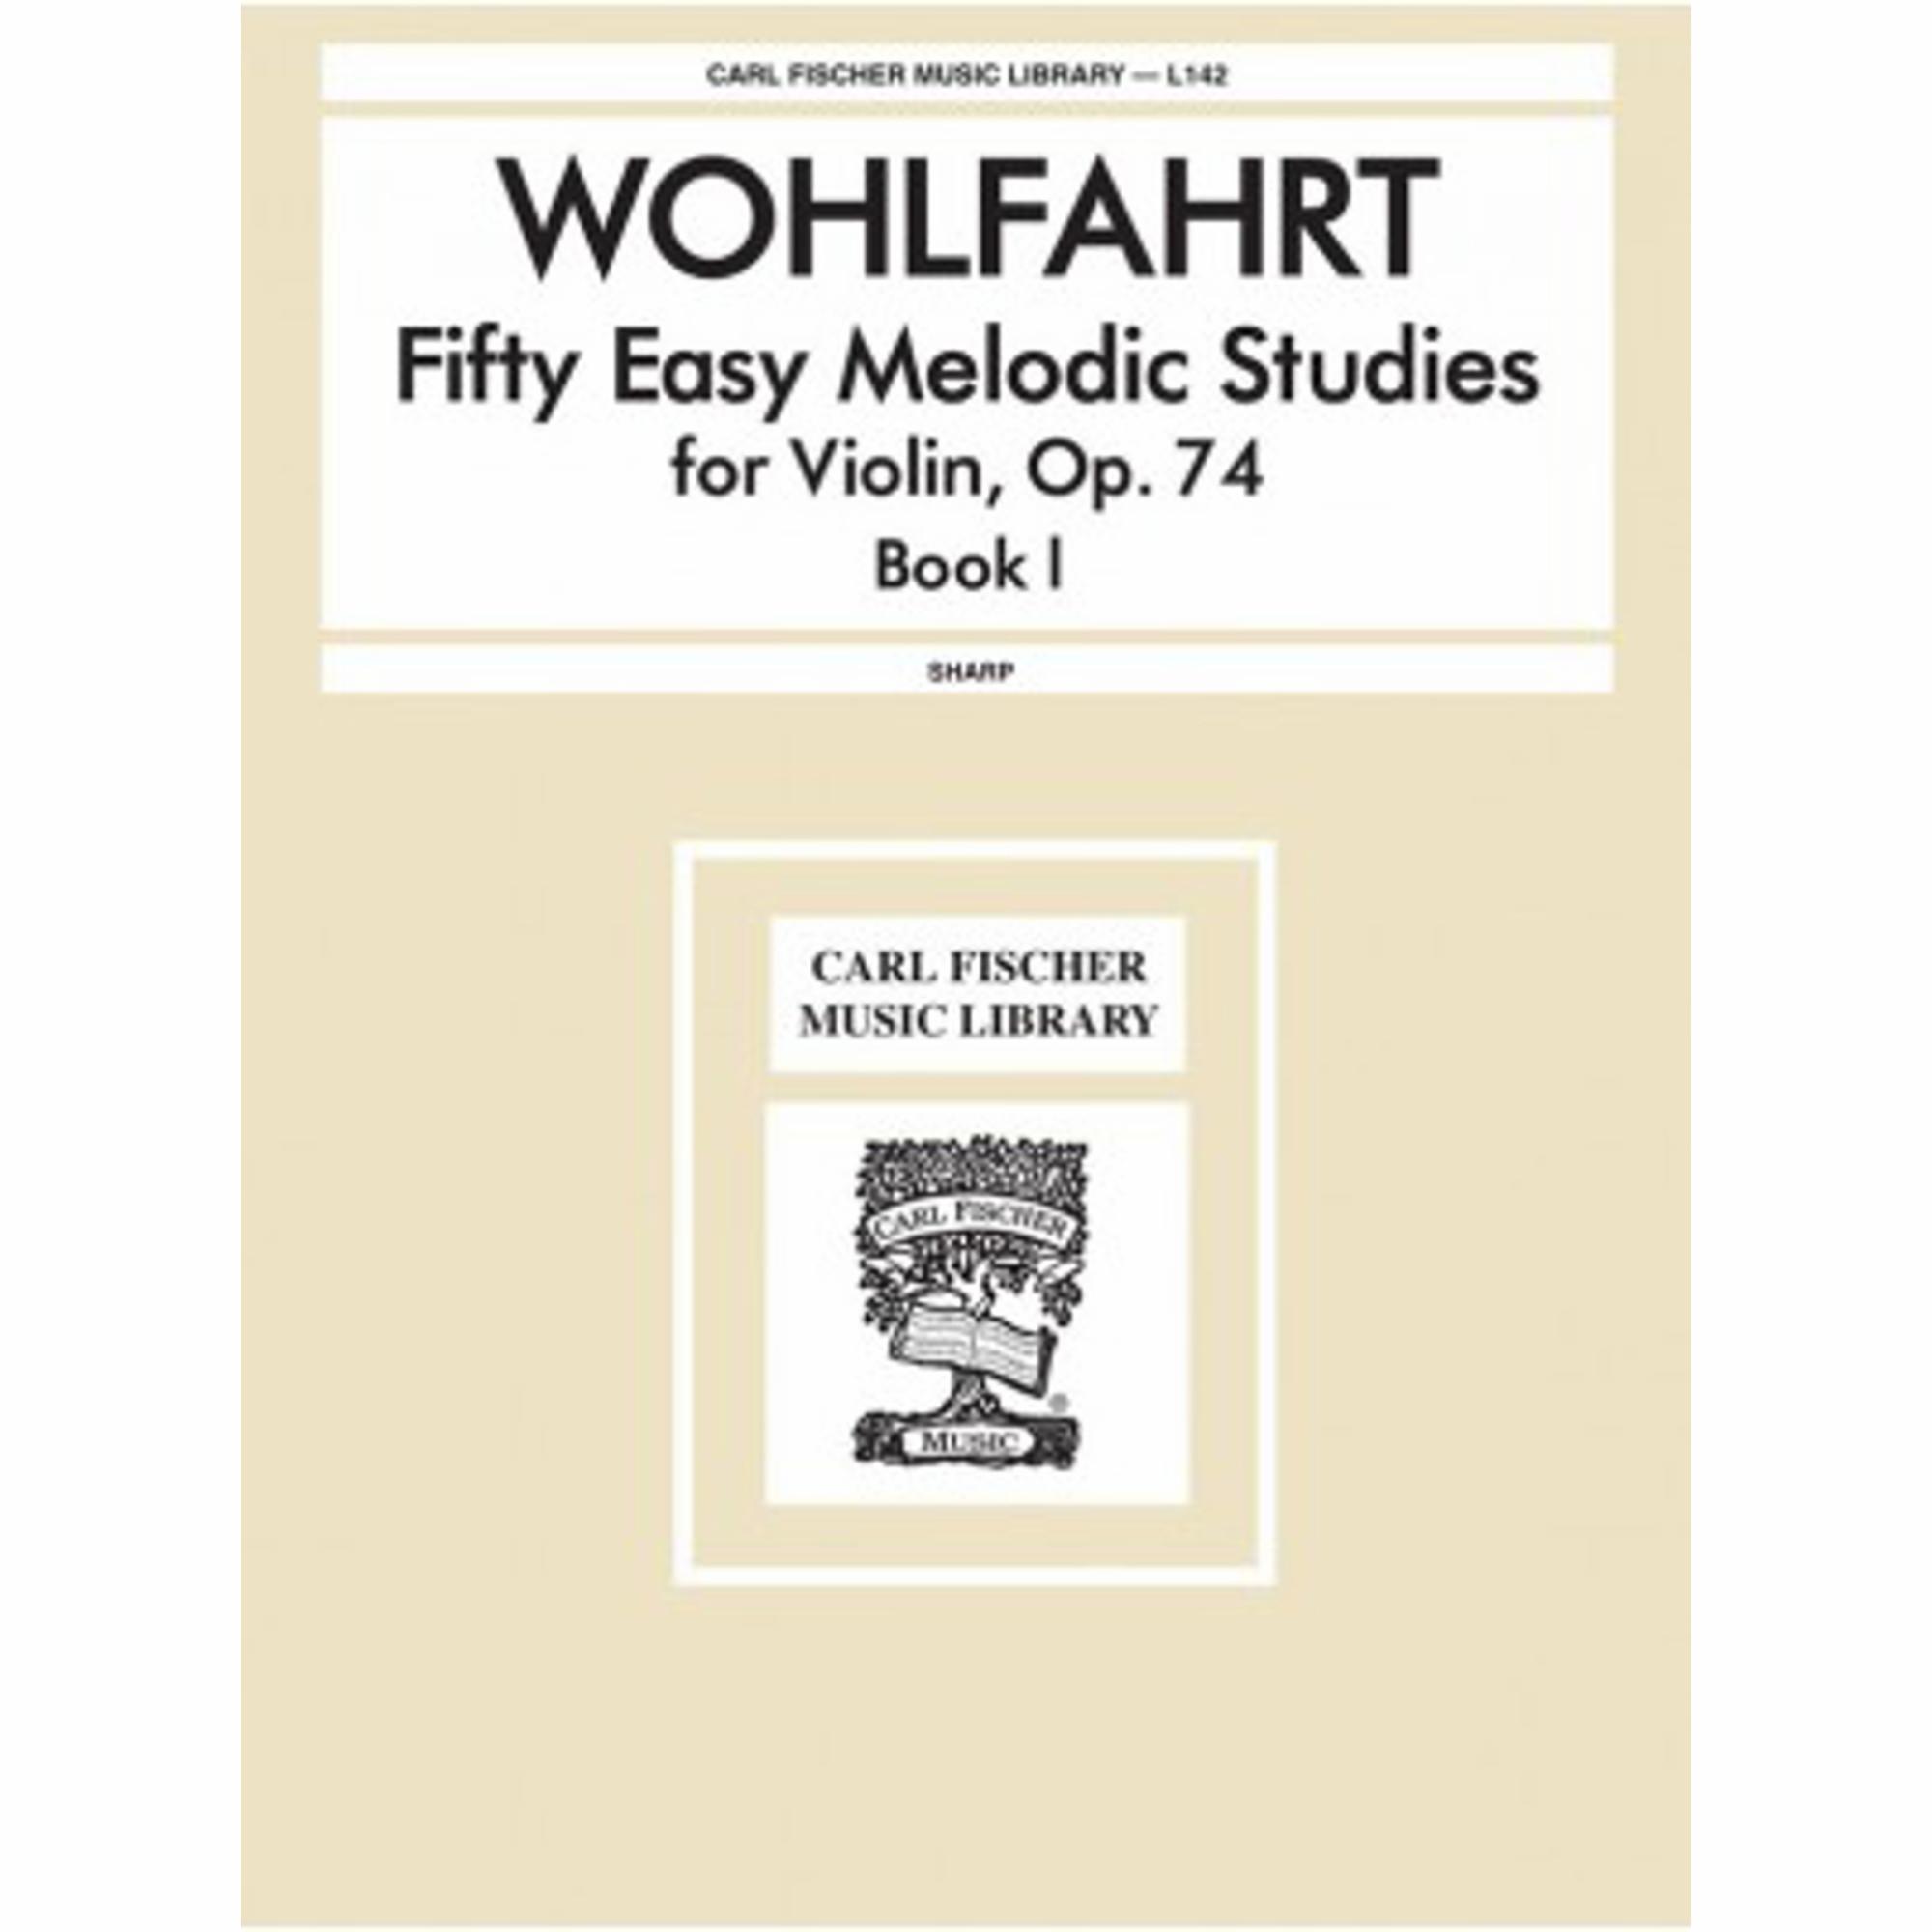 Wohlfahrt -- Fifty Easy Melodic Studies, Op. 74, Books 1-2 for Violin